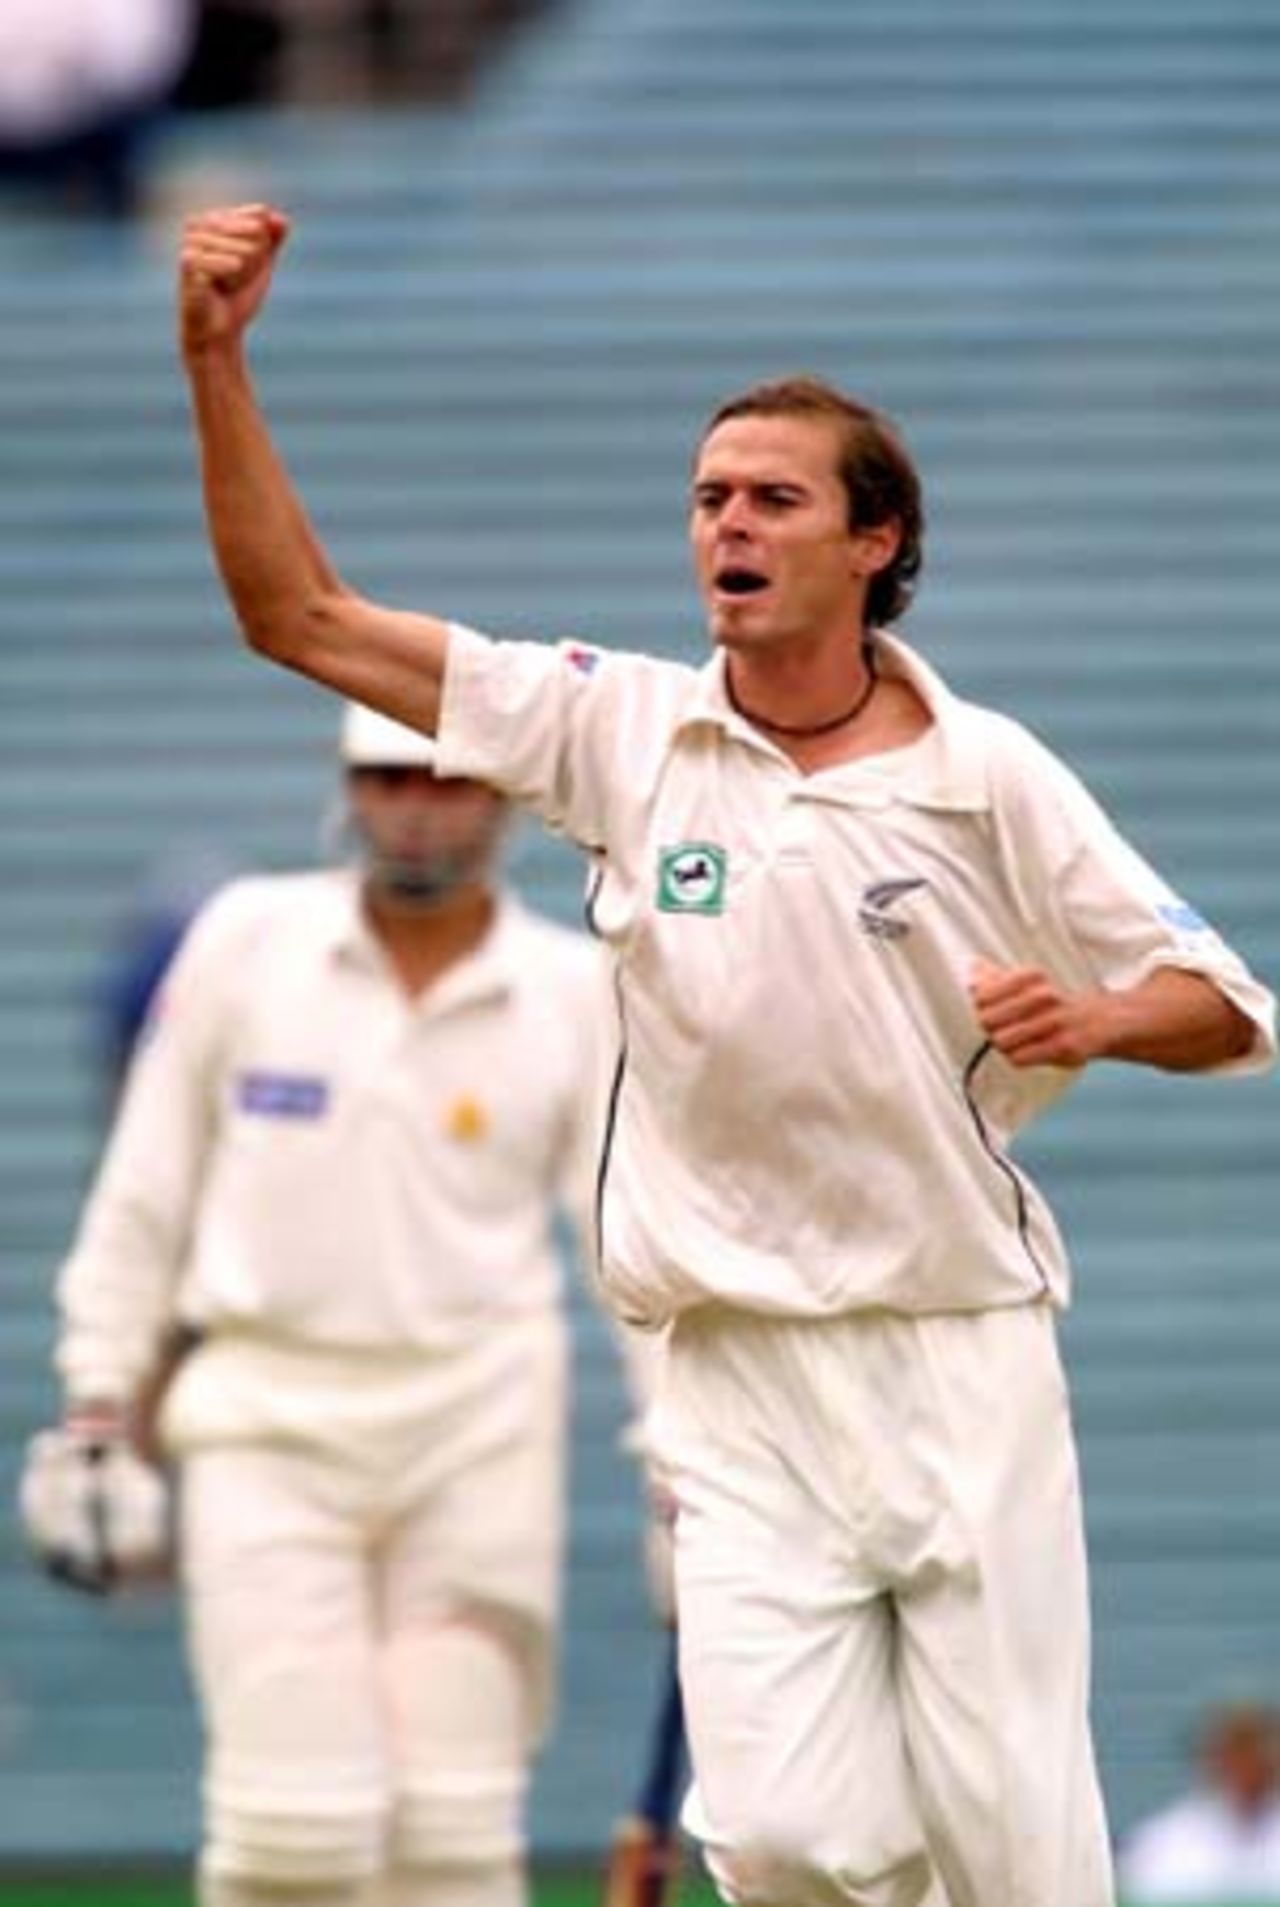 New Zealand fast medium bowler Chris Martin celebrates the dismissal of Pakistan opening batsman Imran Farhat, caught behind by wicket-keeper Adam Parore for 23. Misbah-ul-Haq looks on in the background. 1st Test: New Zealand v Pakistan at Eden Park, Auckland, 8-12 March 2001 (8 March 2001).